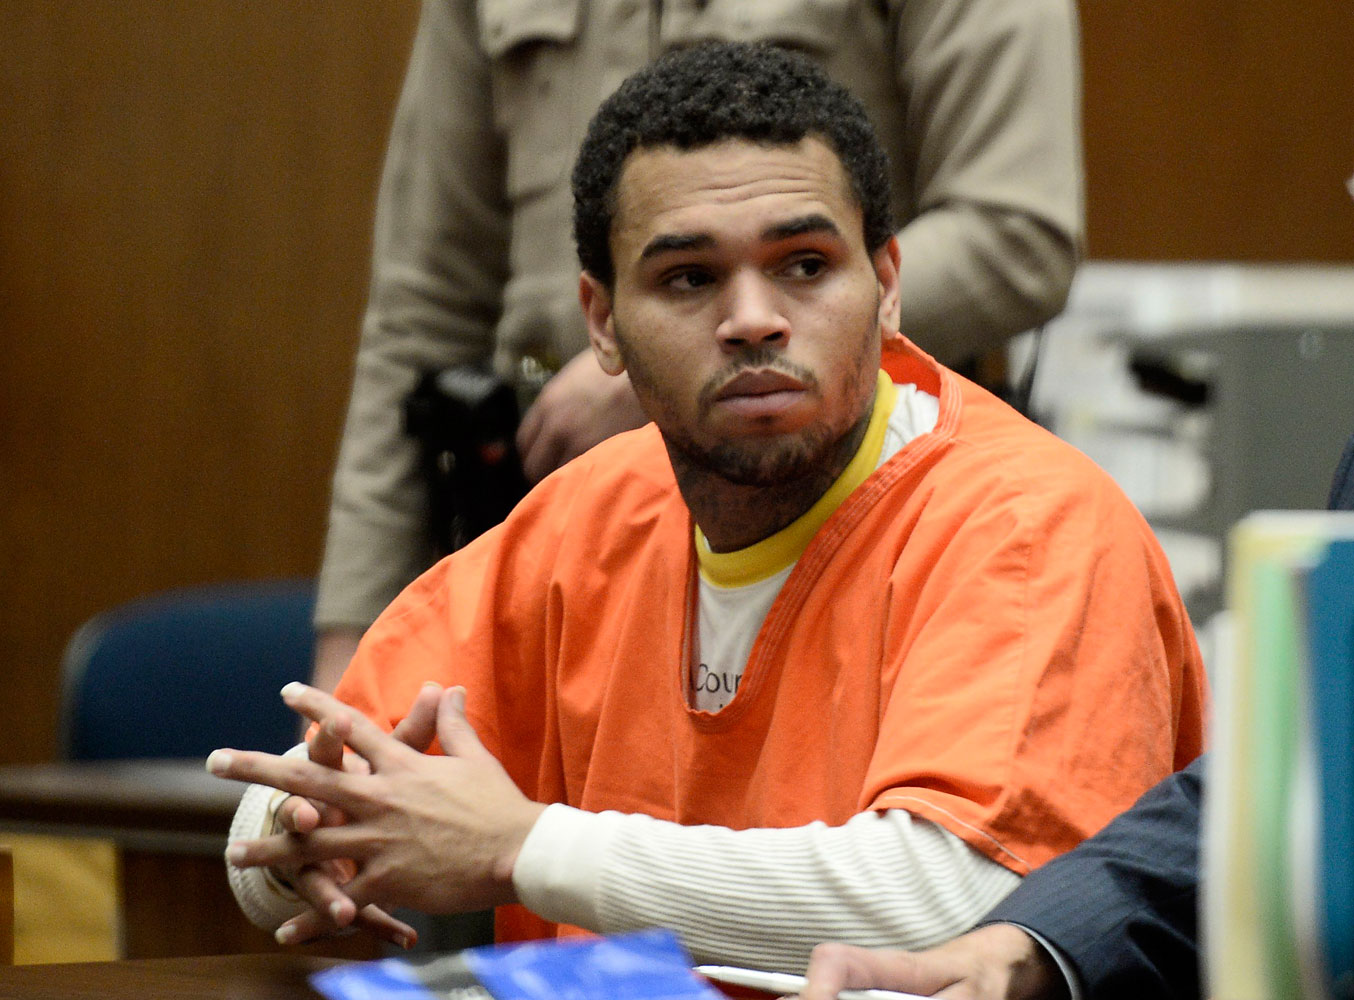 Chris Brown appears in court for a hearing at the Criminal Courts in Los Angeles, May 9, 2014. (Pool—Reuters)